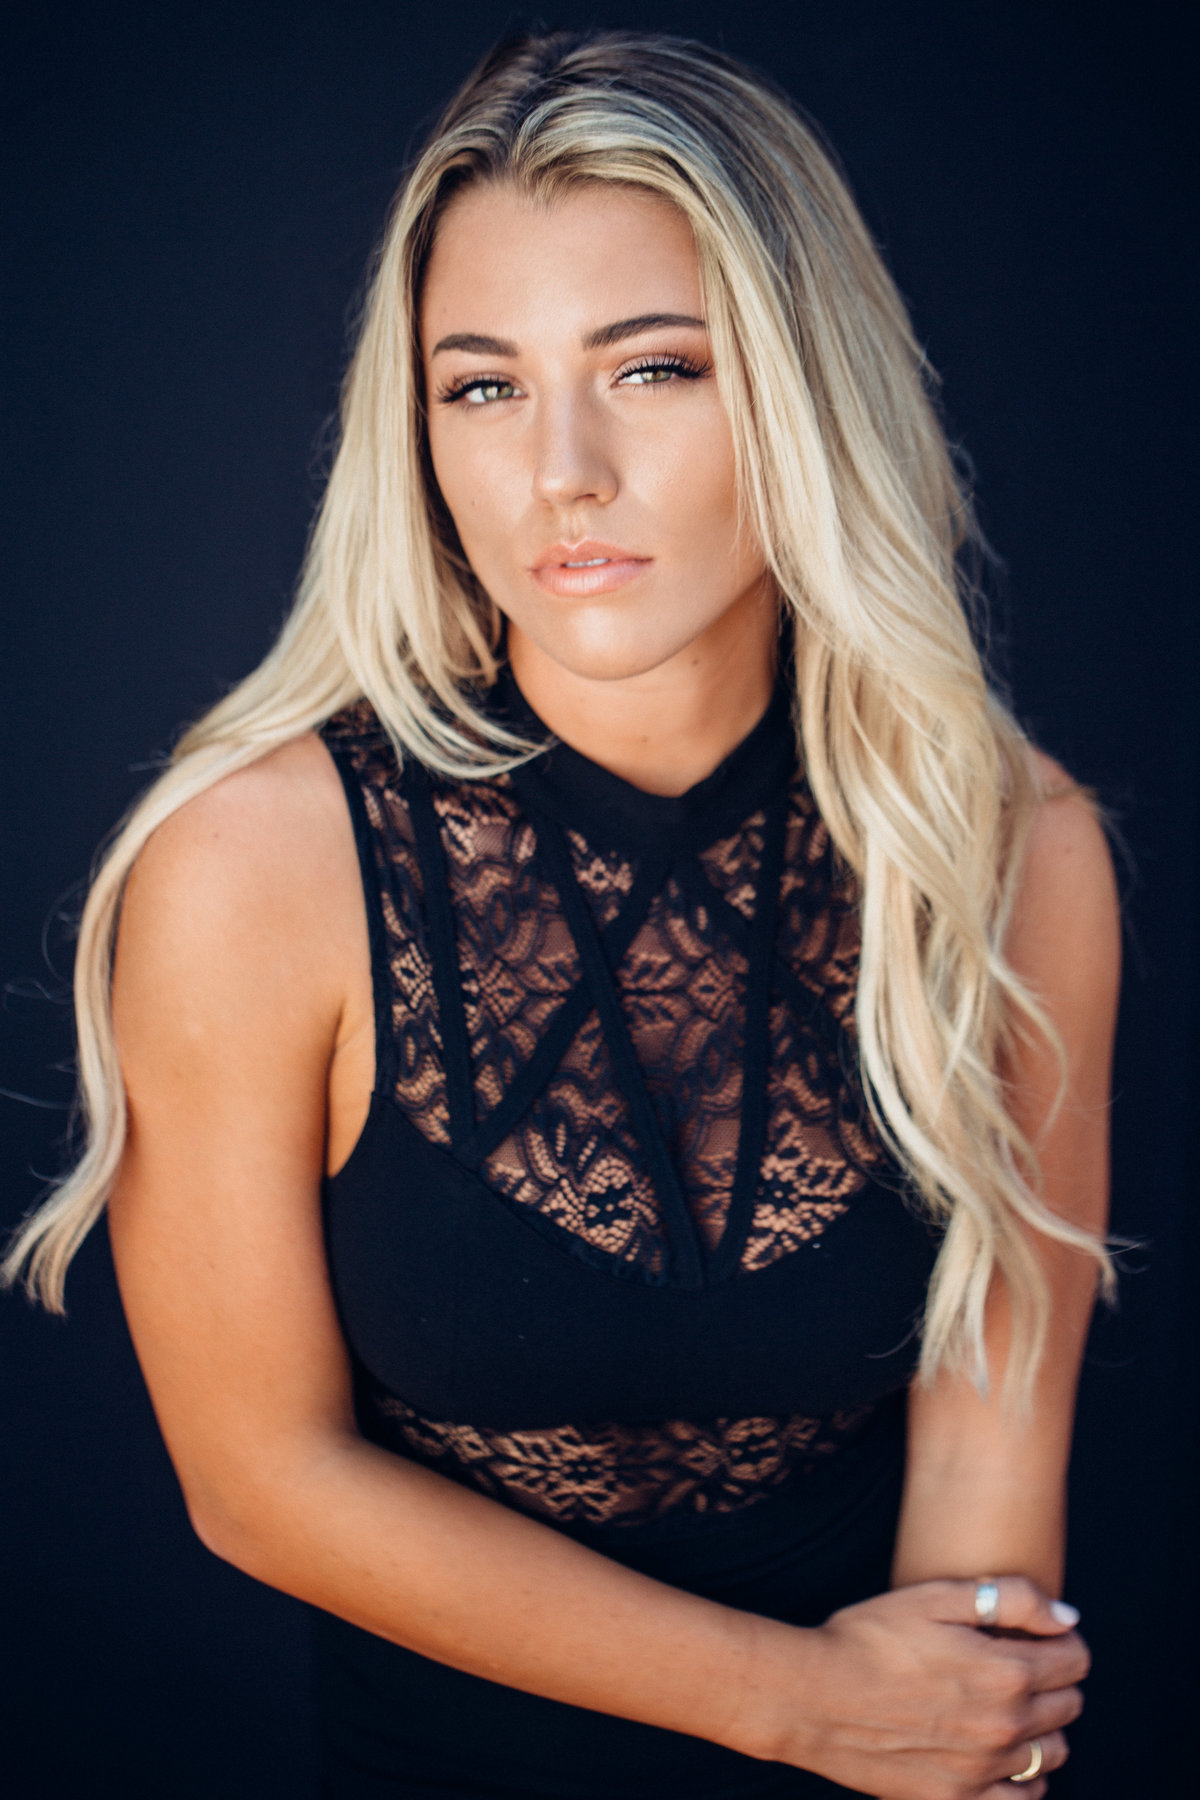 Headshot Photograph Of Young Woman In Black Sleeveless Los Angeles